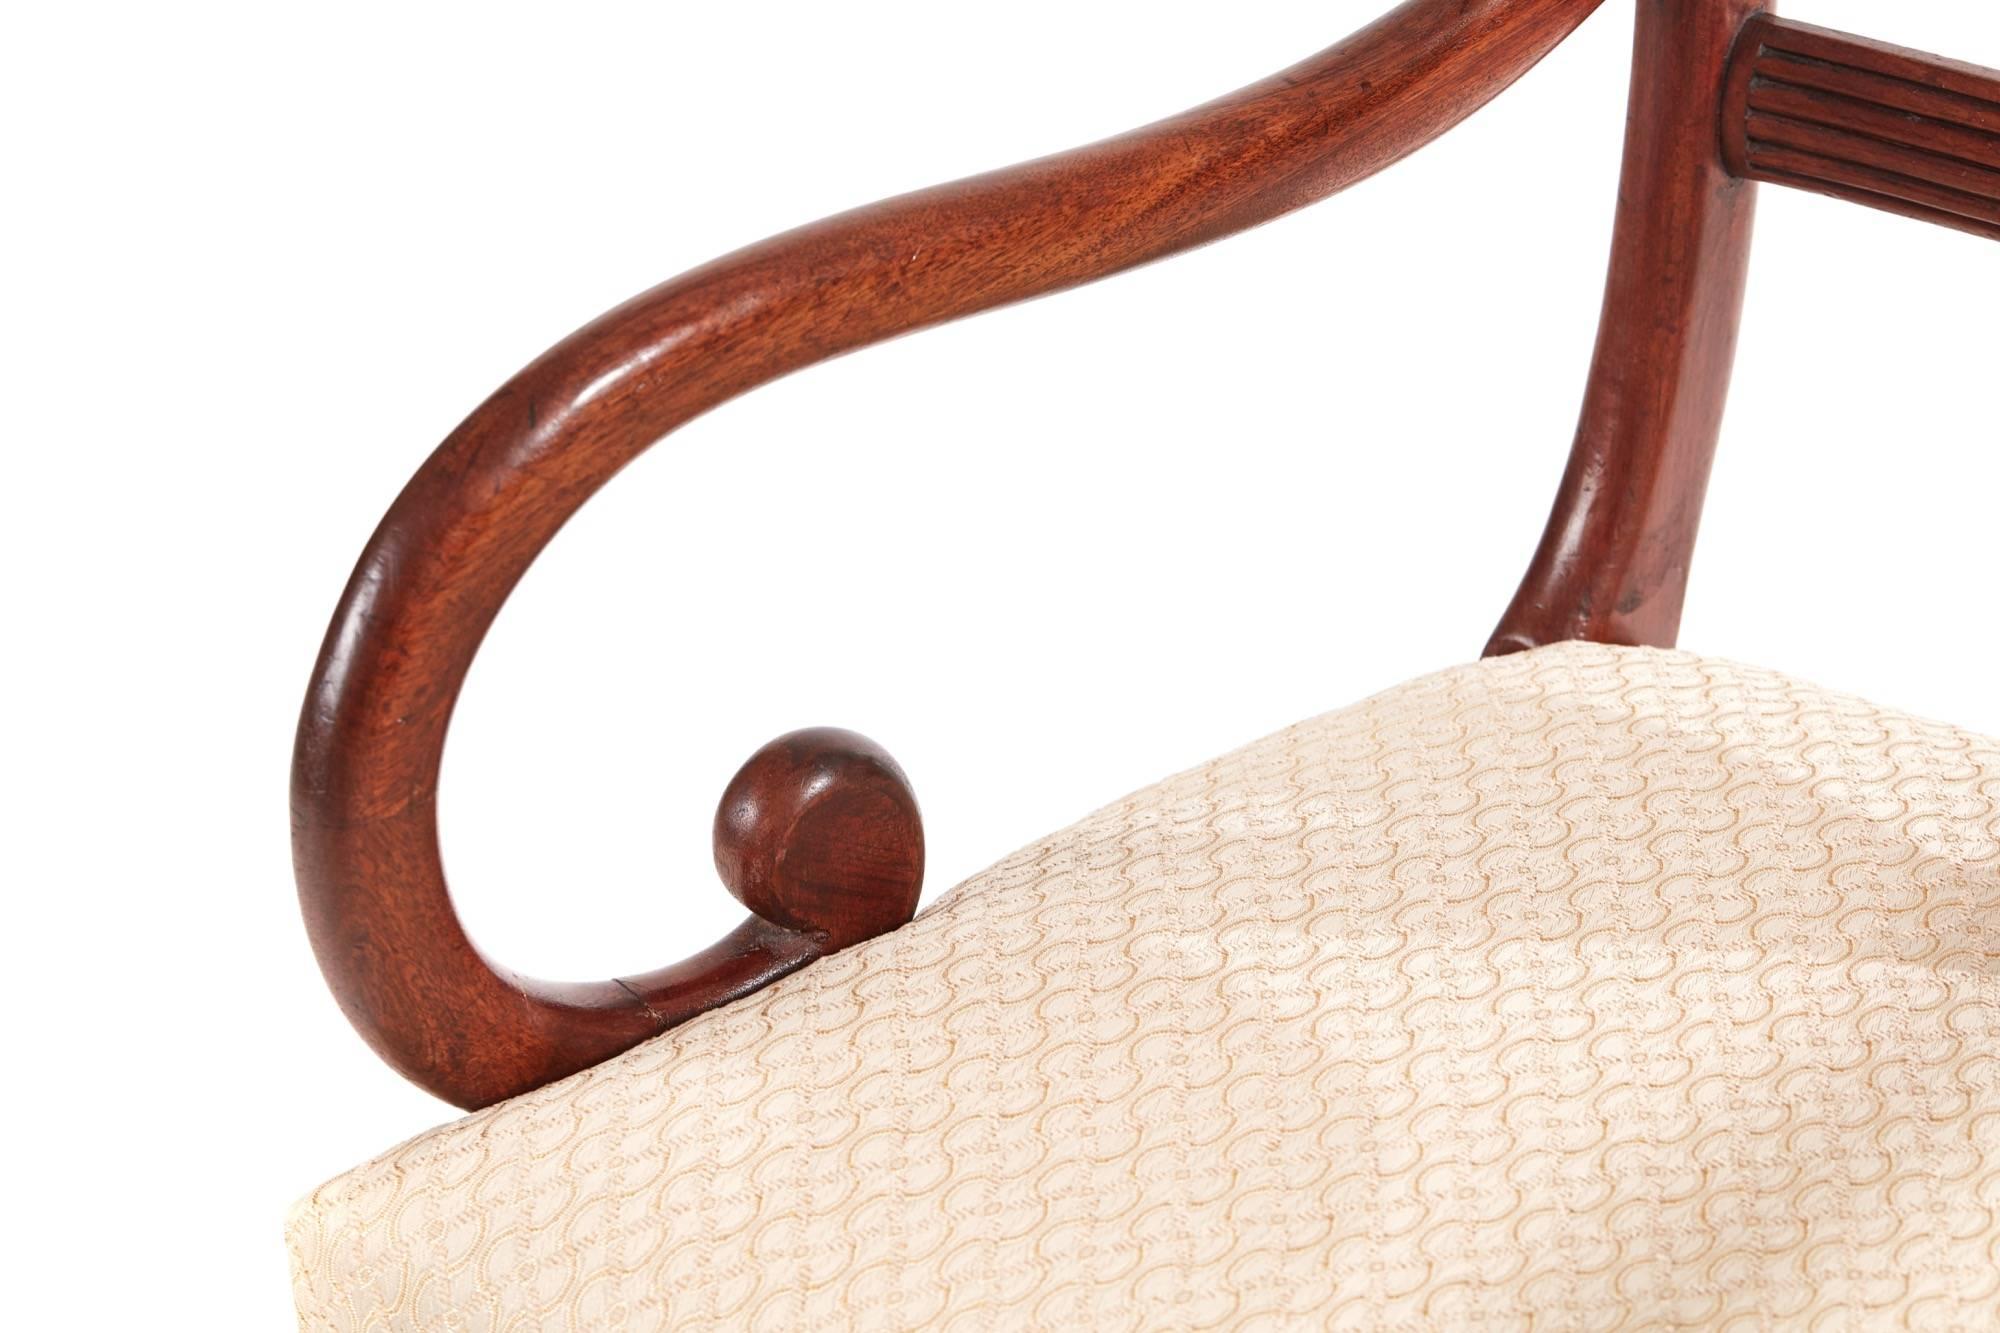 Regency mahogany sabre leg elbow chair, with a shaped reeded top rail, reeded centre splat, scroll shaped arms on sabre legs
Newly recovered seat
Lovely color and condition.